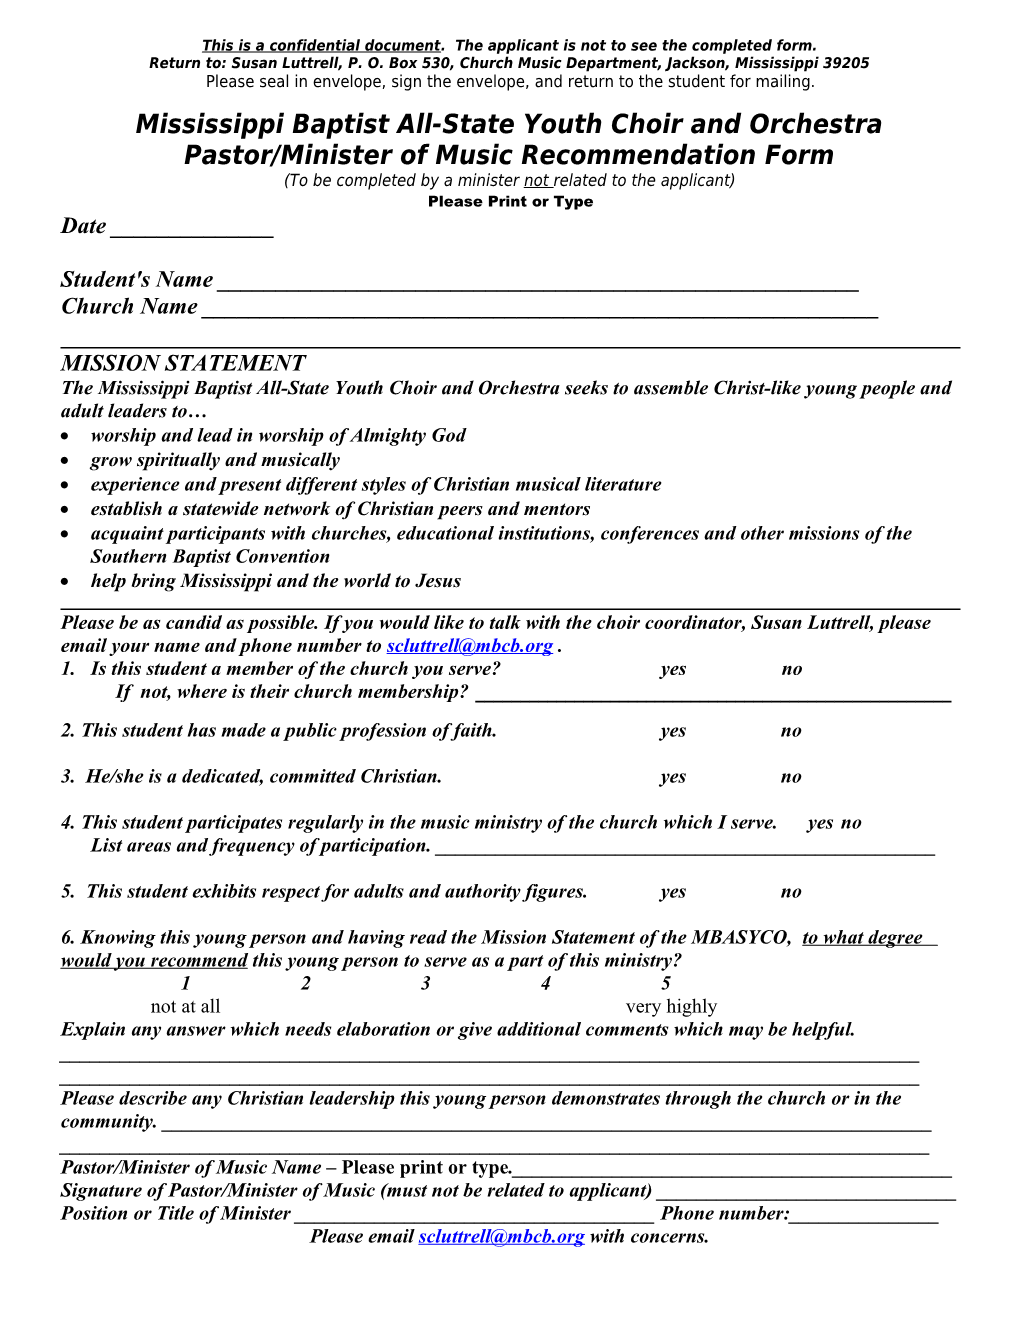 This Is a Confidential Document. the Applicant Is Not to See the Completed Form